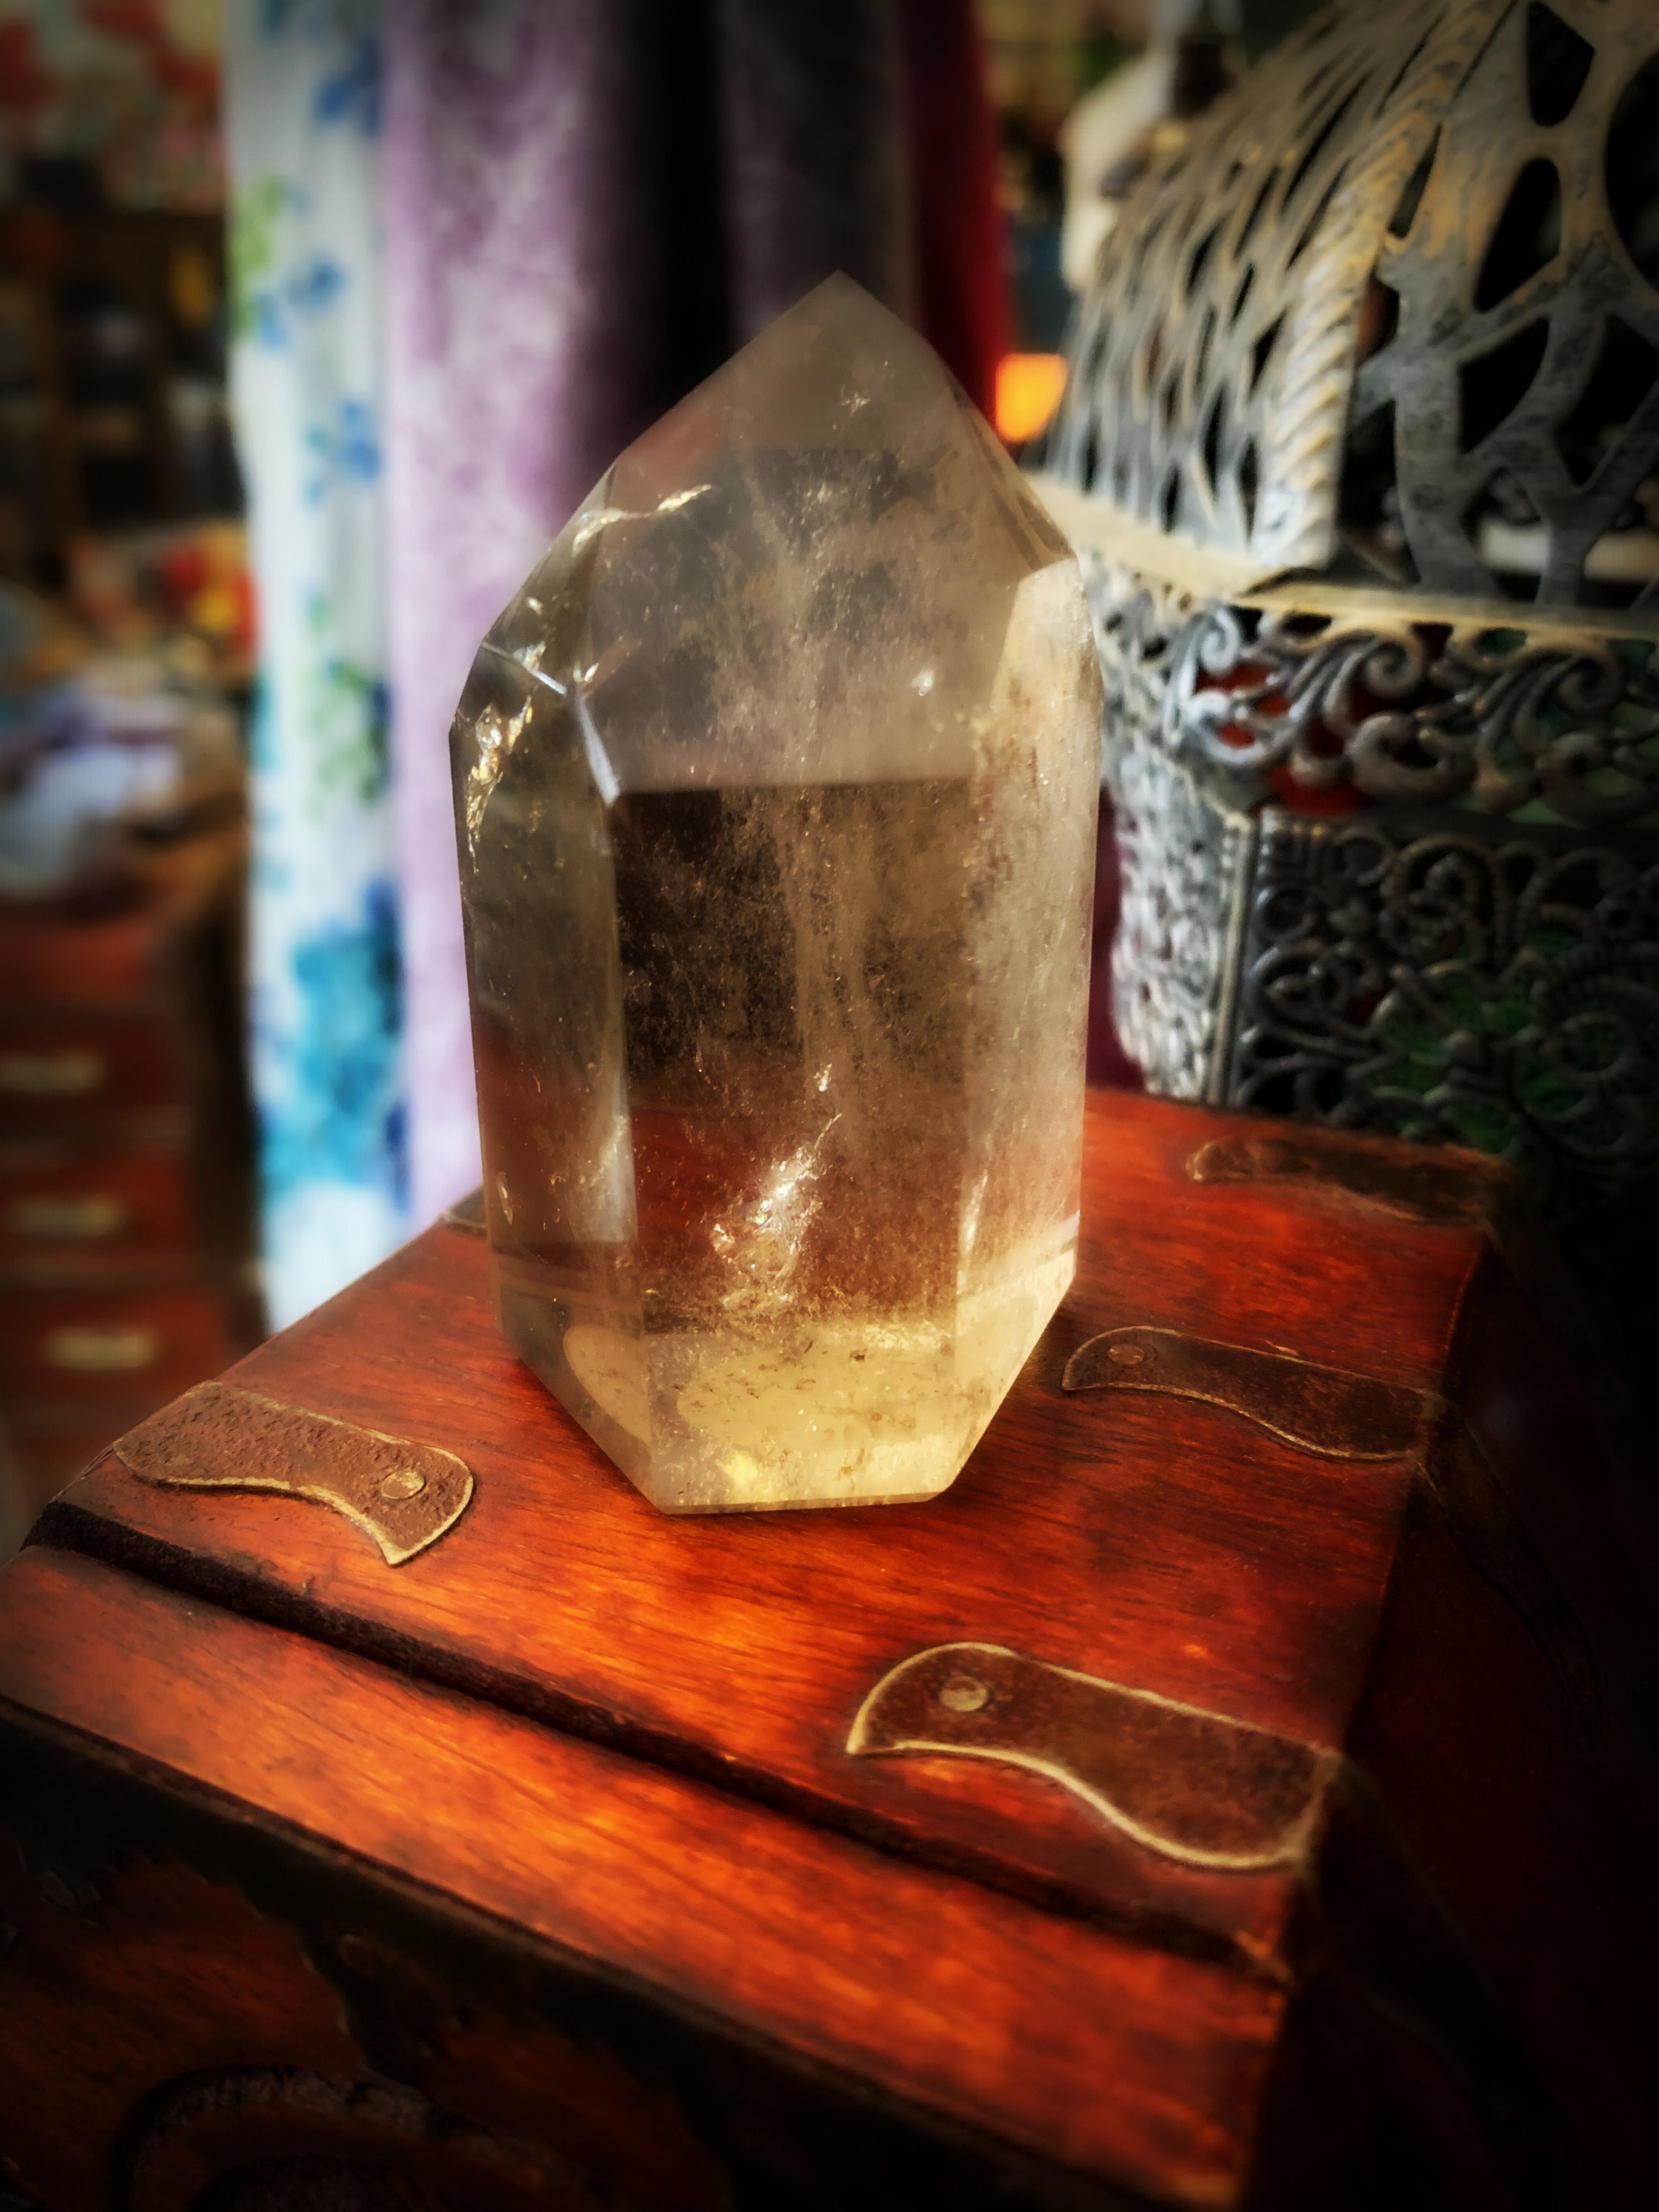 SMOKY QUARTZ POLISHED CRYSTAL POINTS ~ For Grounding and Cleansing Negativity